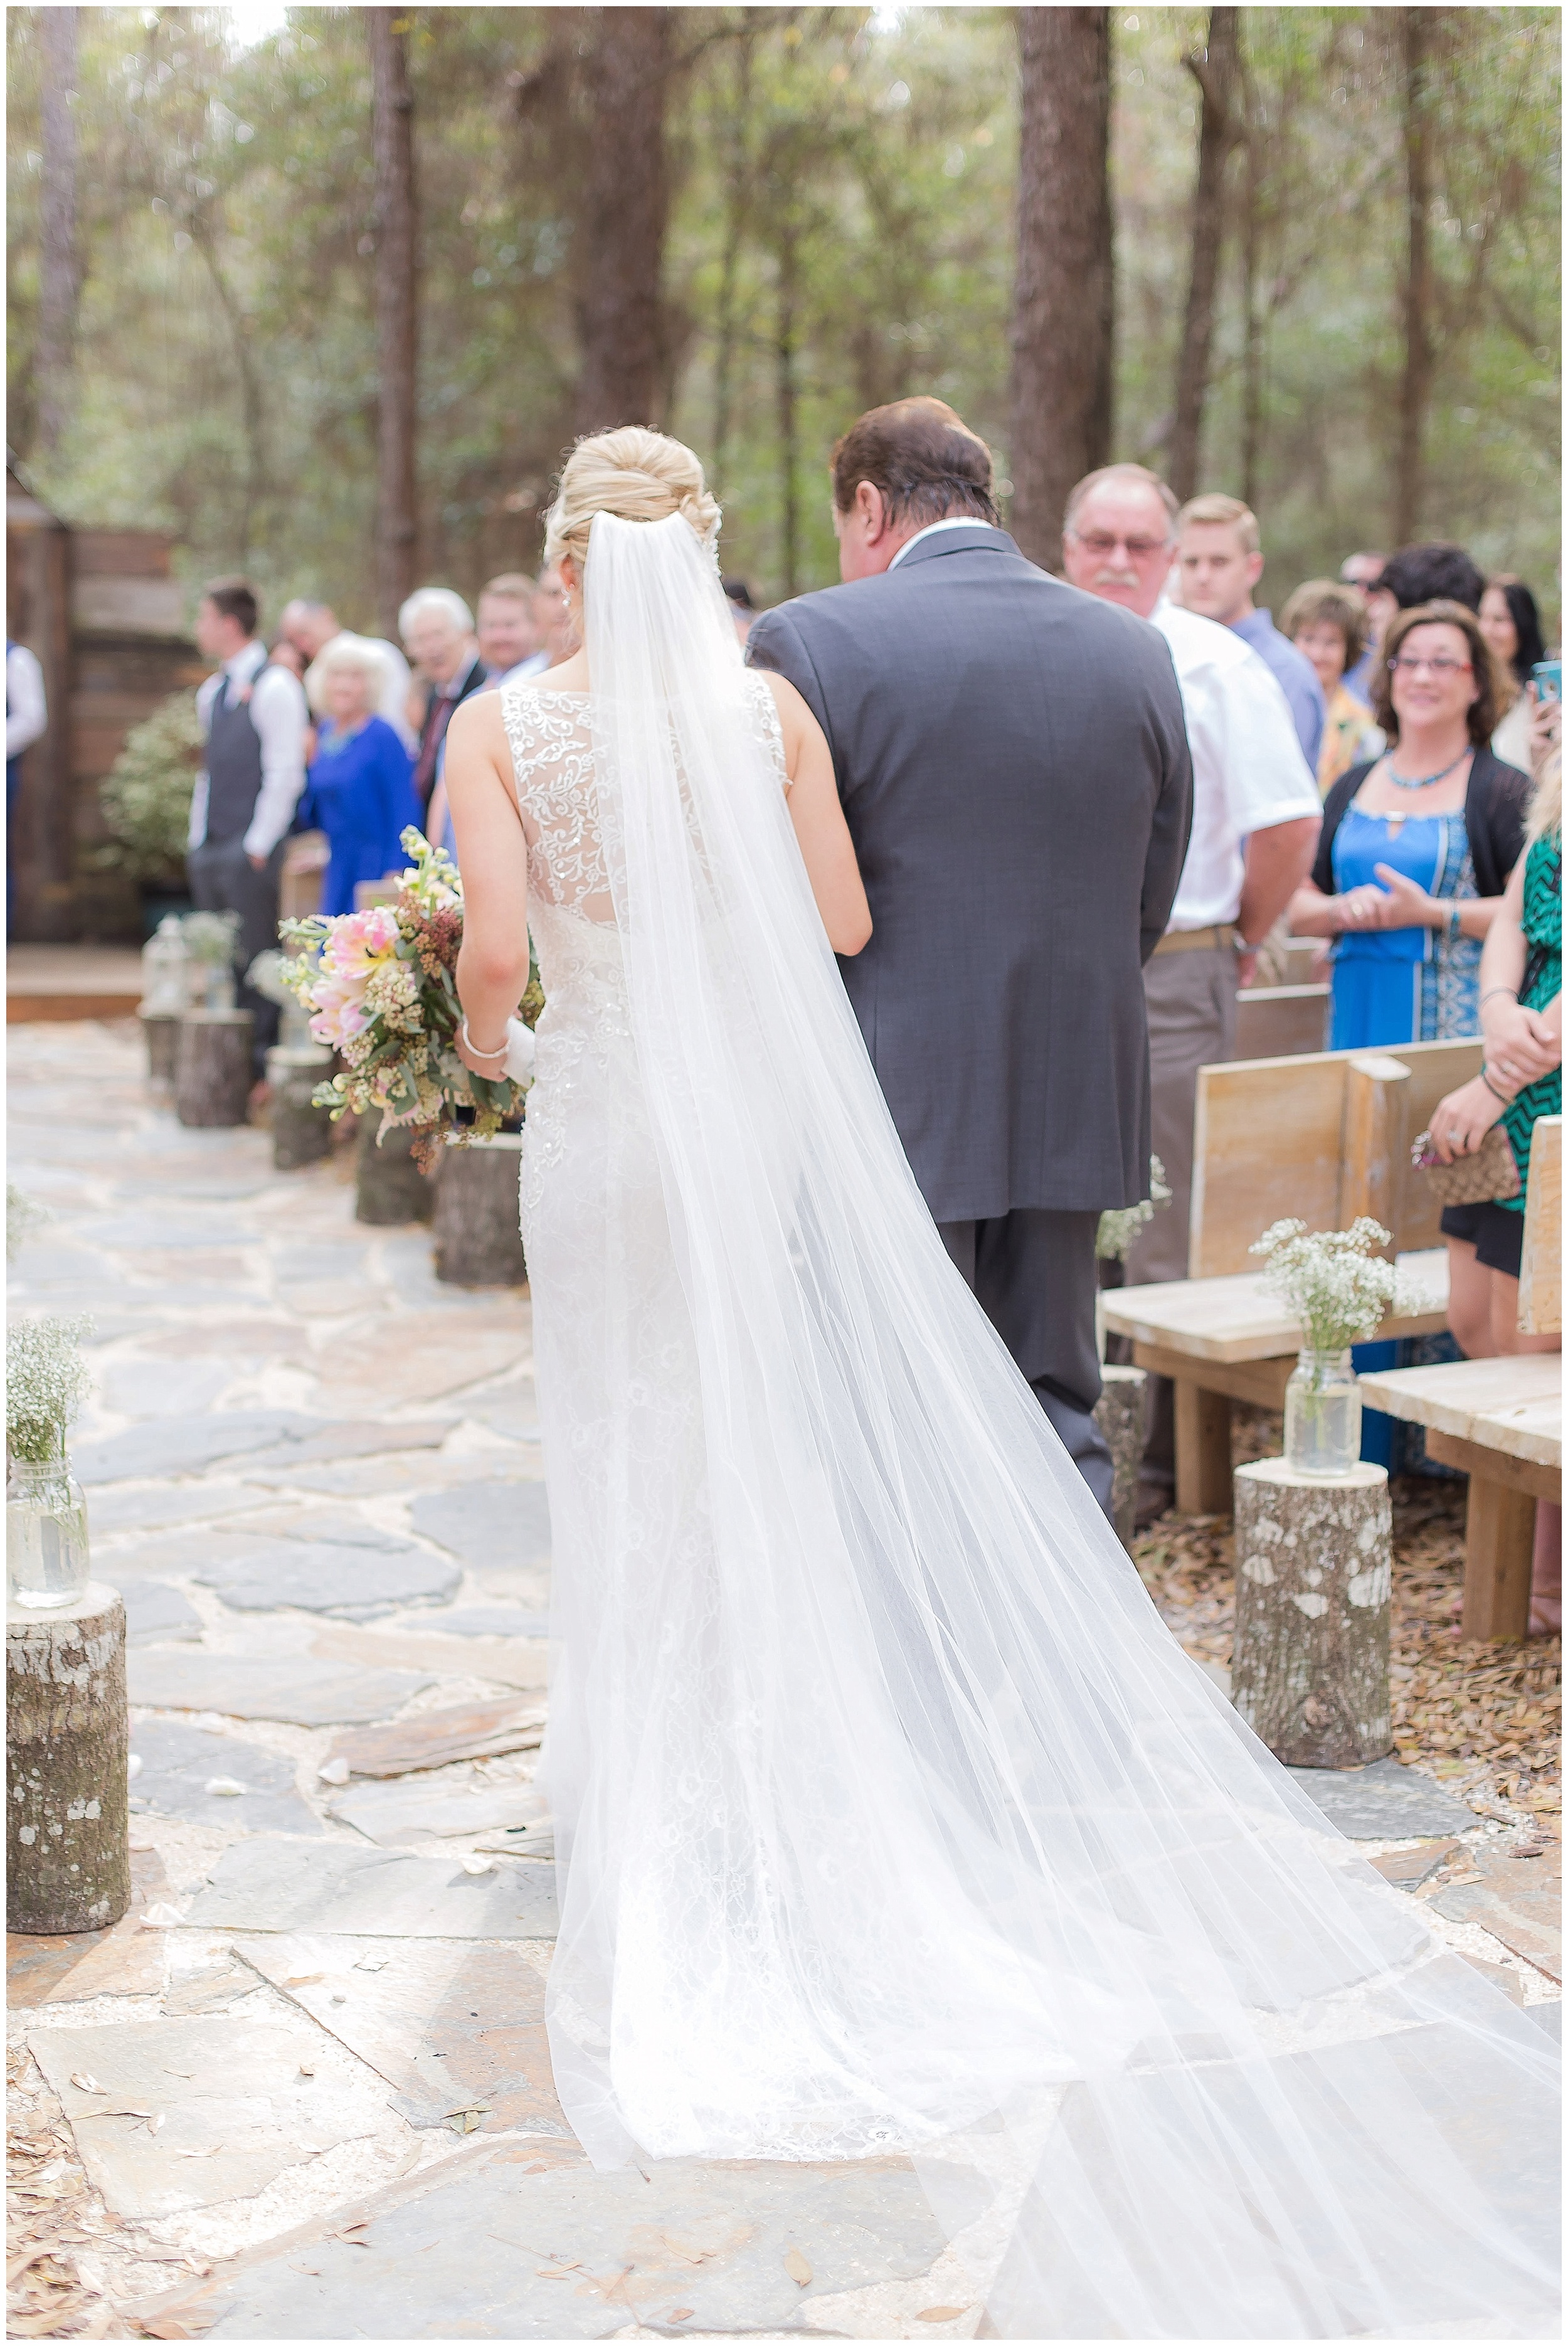 Father Walks Daughter Down the Isle - Rustic Wedding with Lace Dress 